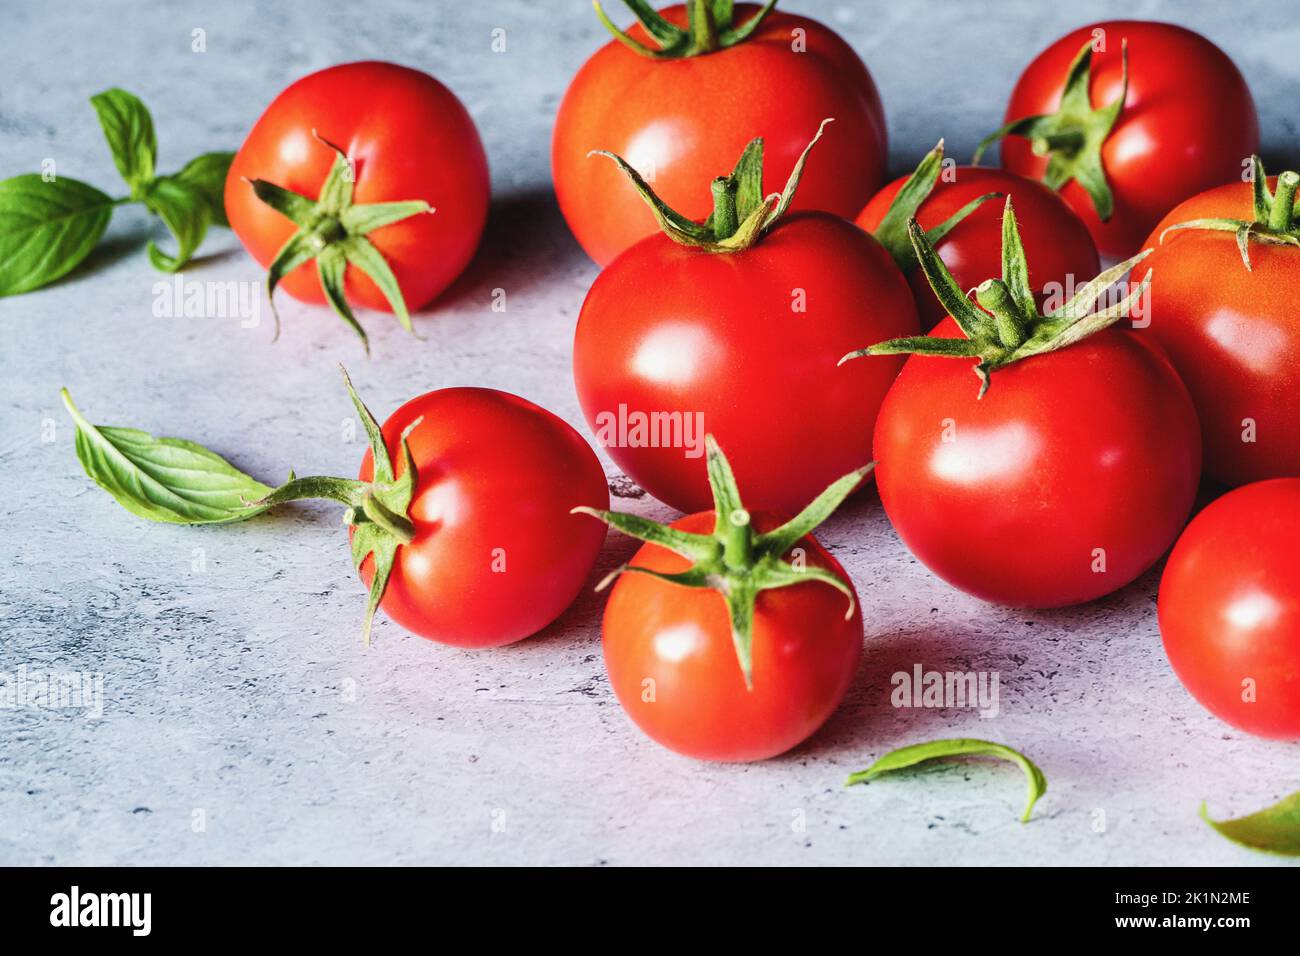 Red tomatoes with green basil leaves on gray concrete background, selective focus Stock Photo